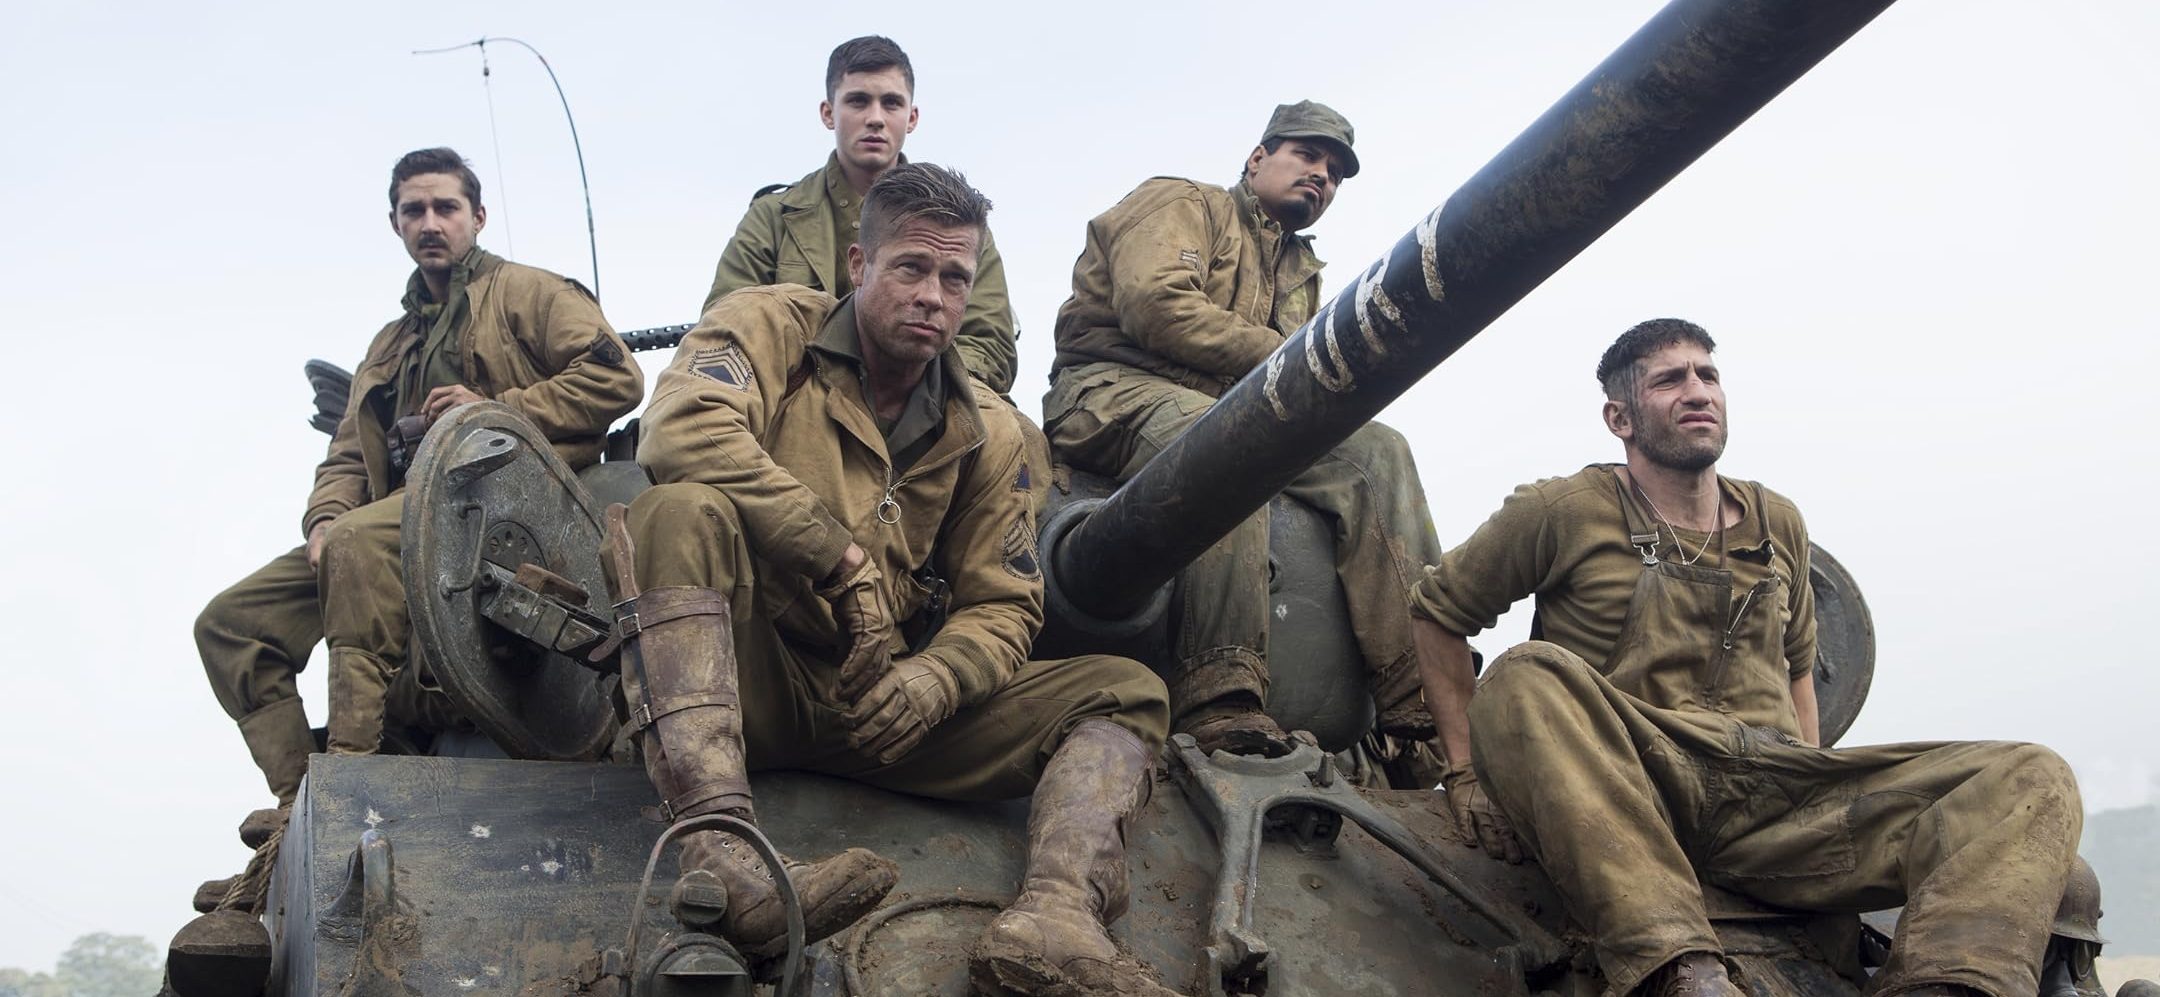 Is Fury a Sequel to Inglourious Basterds?